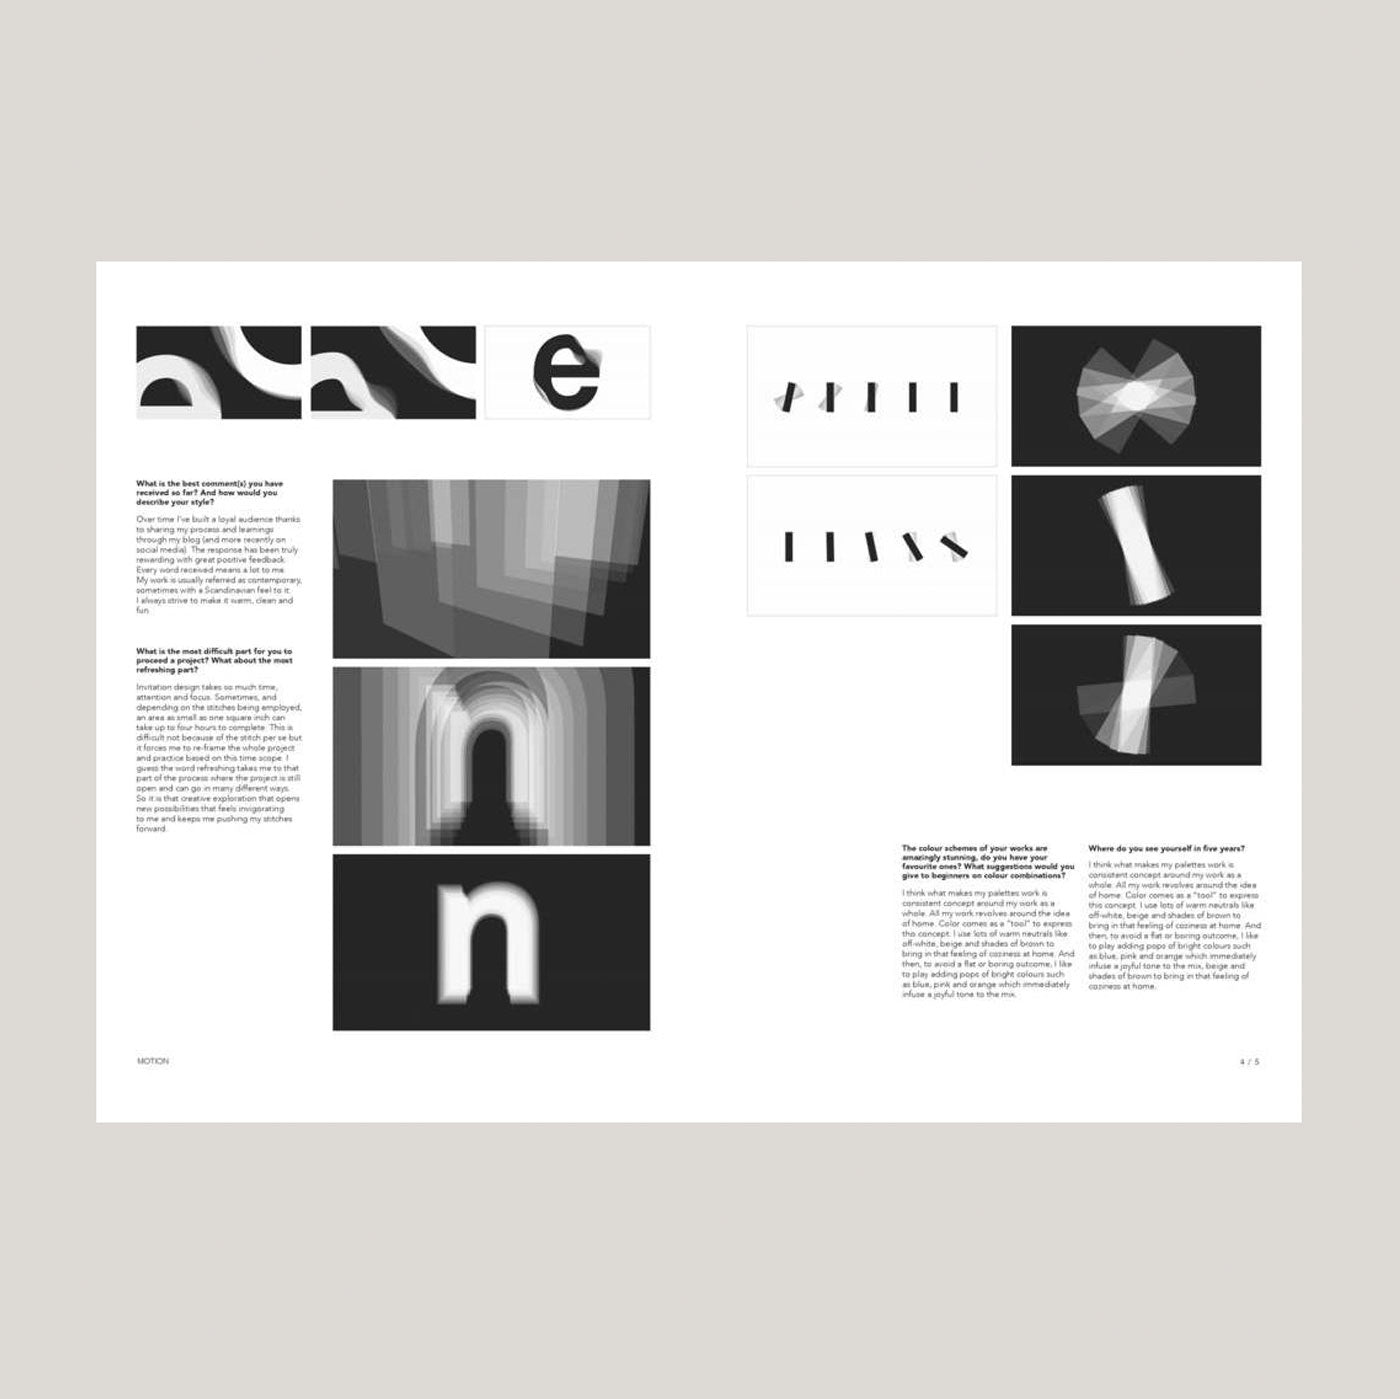 Typography for Screen: Type in Motion | Shaoqiang Wang (Ed)